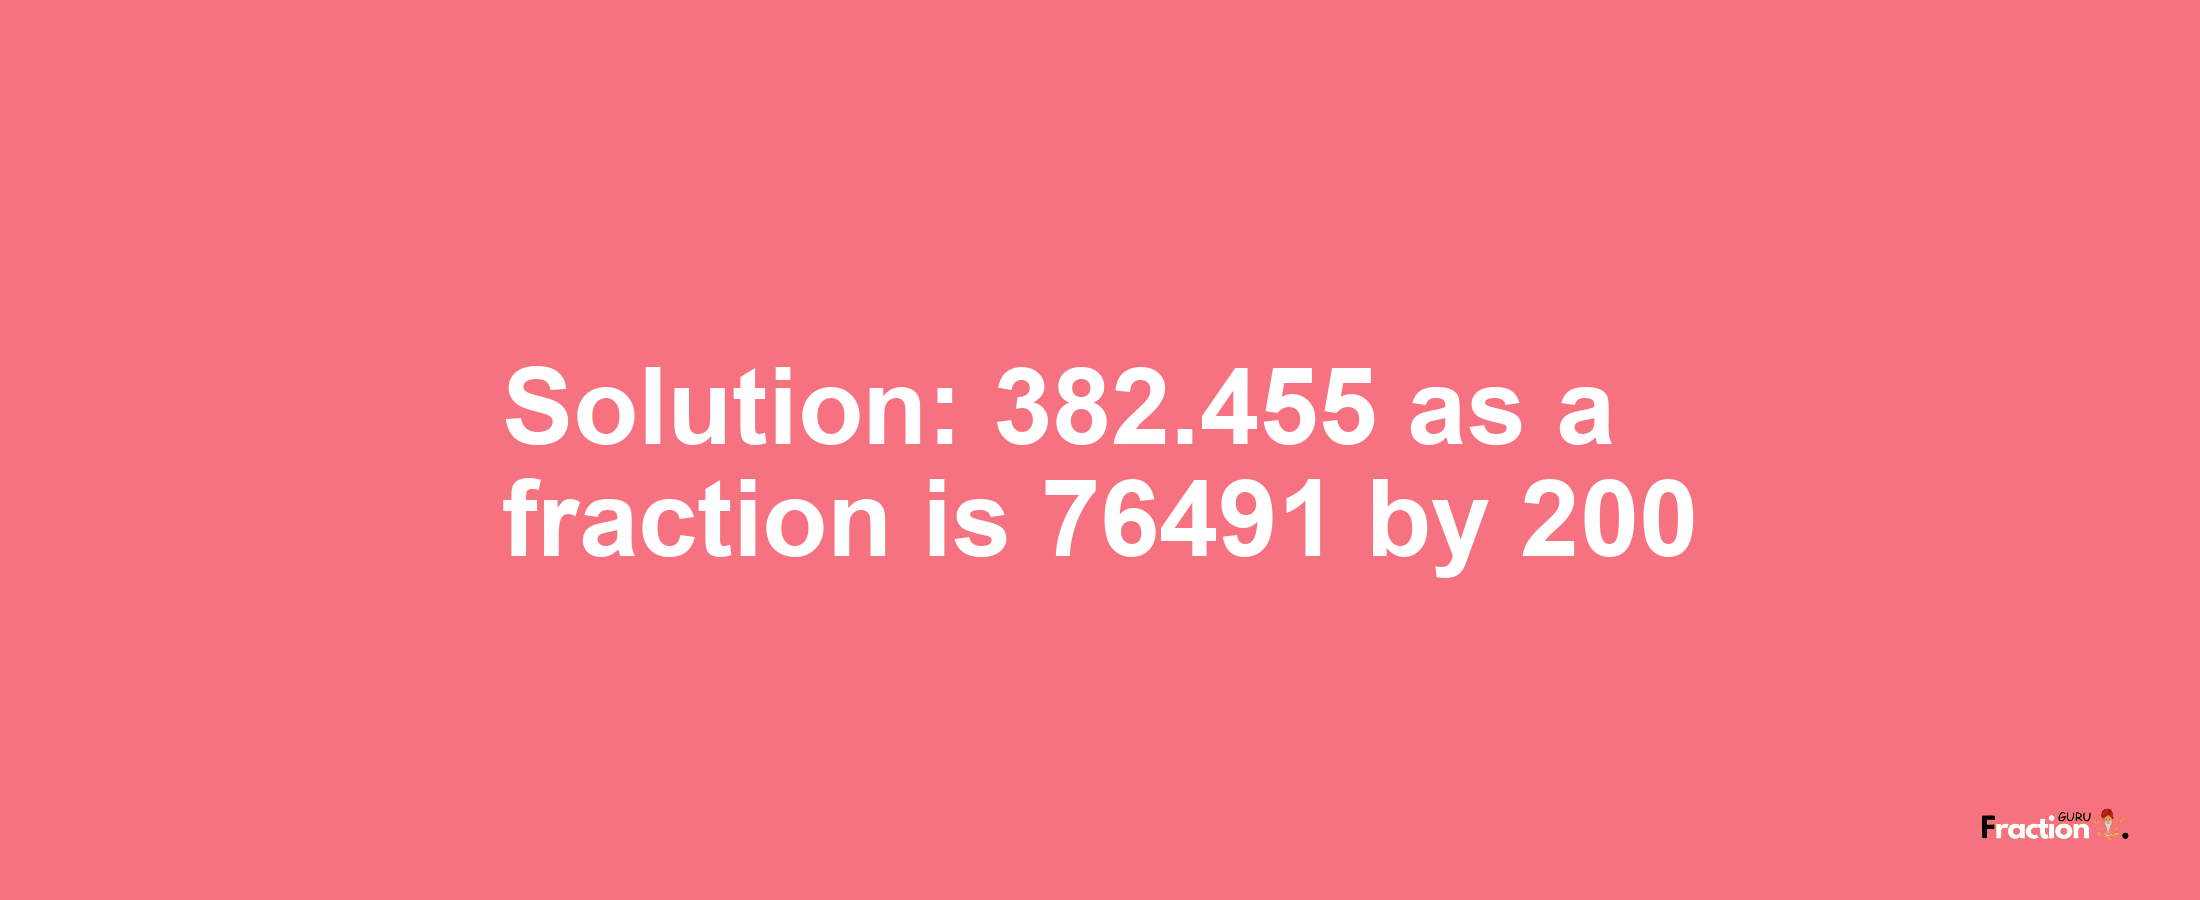 Solution:382.455 as a fraction is 76491/200